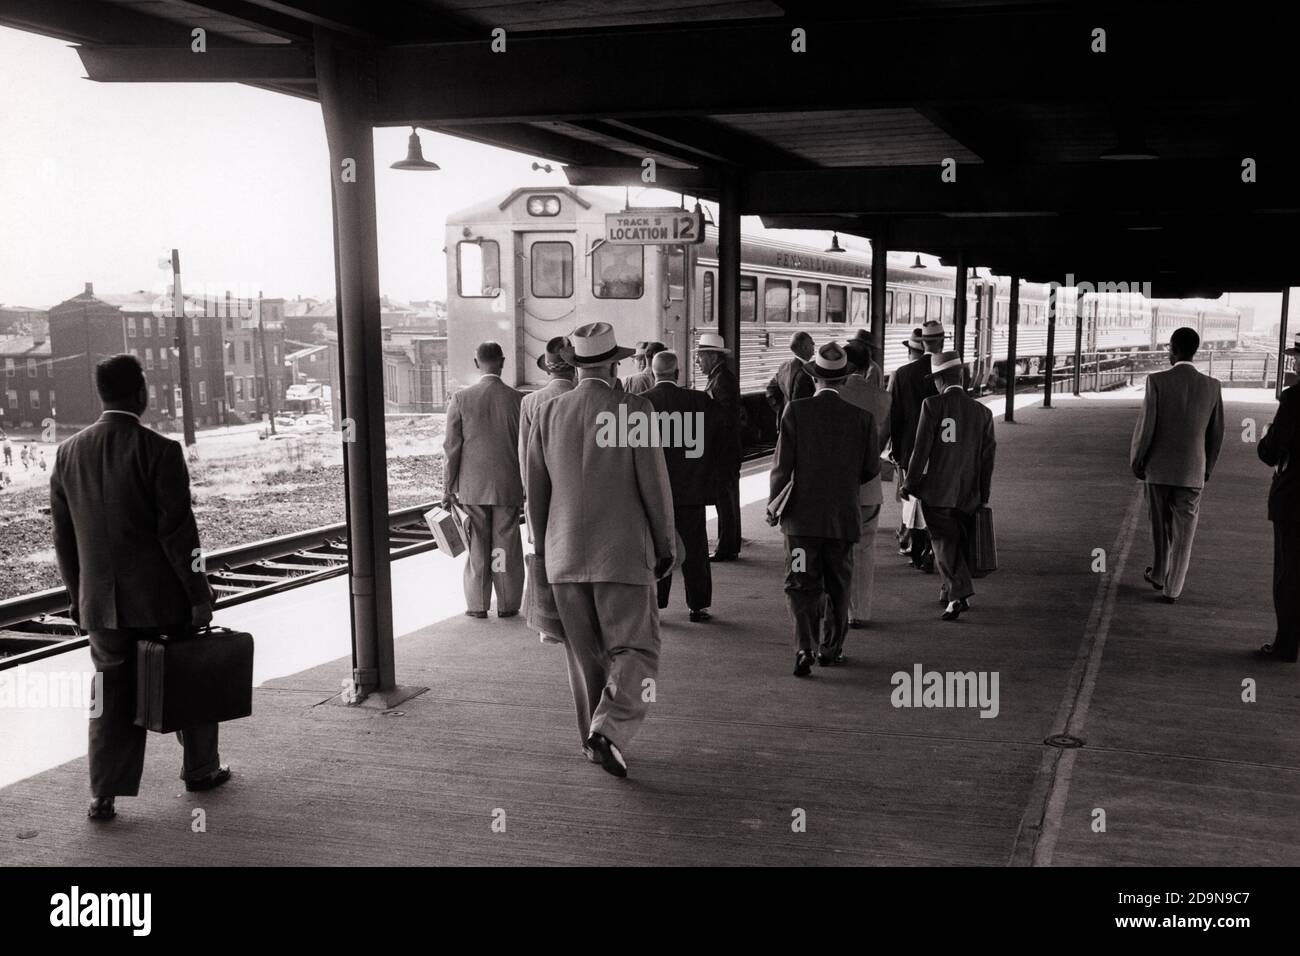 1960s MEN IN SUITS AND HATS BUSINESSMEN BACK VIEW OF SUBURBAN STATION PASSENGERS WAITING FOR REGIONAL COMMUTER TRAIN - r526 HAR001 HARS TRANSPORTATION B&W NORTH AMERICA NORTH AMERICAN RAIL SKILL OCCUPATION PLATFORM SKILLS COMMUTERS AND REAR VIEW IN OF NJ OCCUPATIONS CAMDEN CONNECTION FROM BEHIND NEW JERSEY RAILROADS BACK VIEW COOPERATION TOGETHERNESS BLACK AND WHITE COMMUTER HAR001 OLD FASHIONED REGIONAL Stock Photo